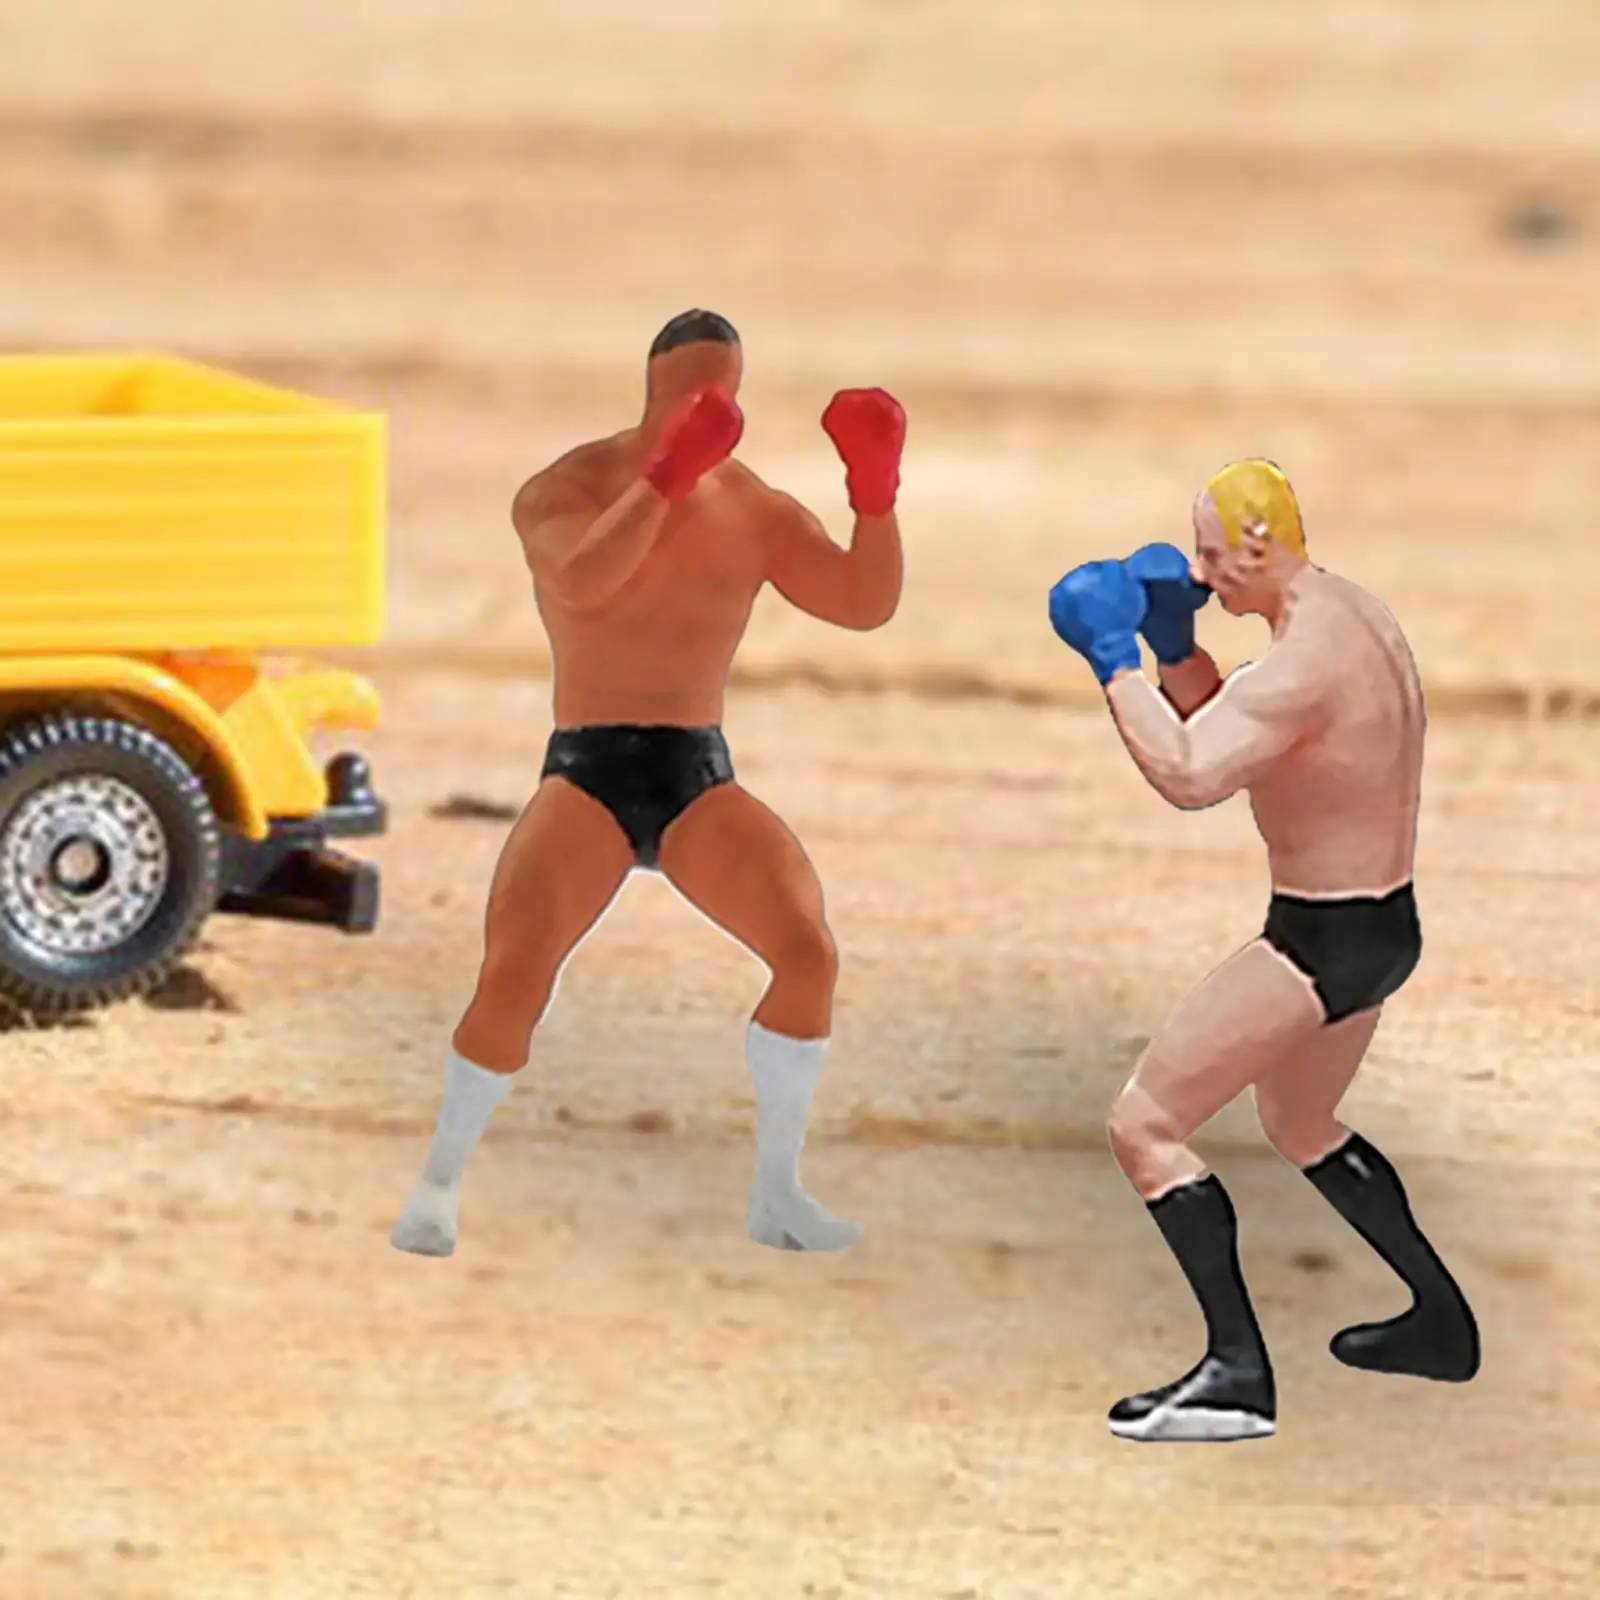 1/64 Boxing Figures People Figurines Diorama Collectibles Sand Table Ornament for DIY Scene Diorama Decoration Accessories